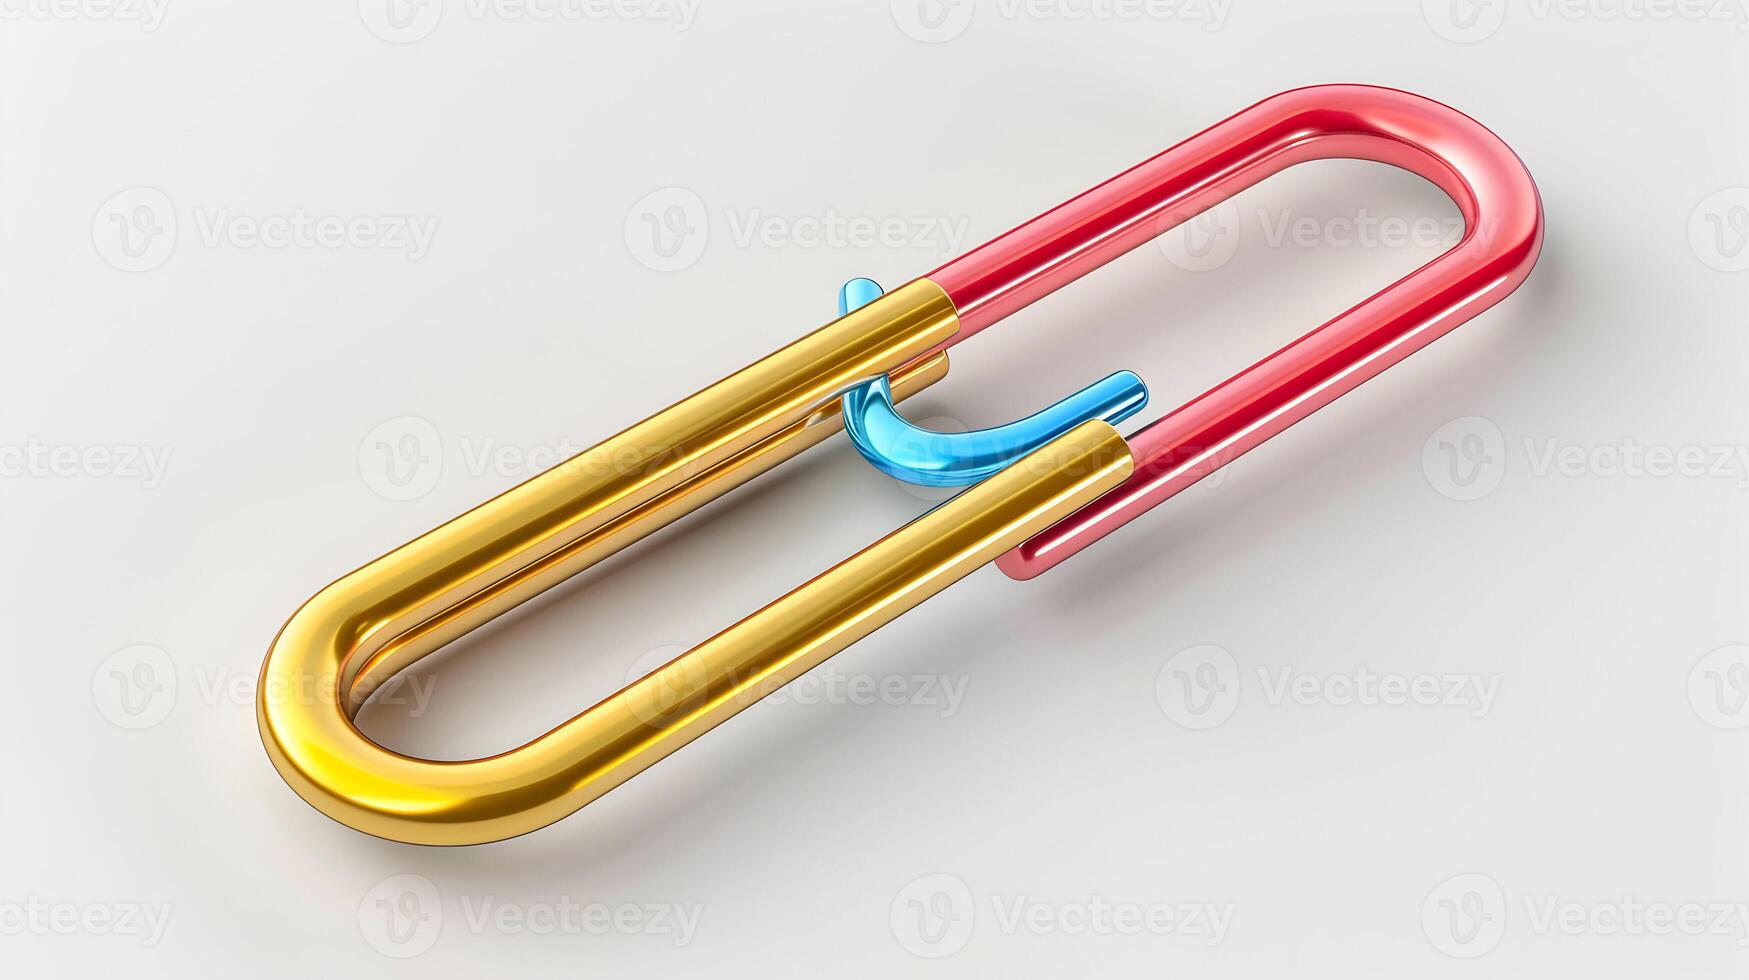 3d Flat cartoon style as Paperclip isolated on white background concept as A simple paperclip isolated on a white background symbolizing office organization document management and photo